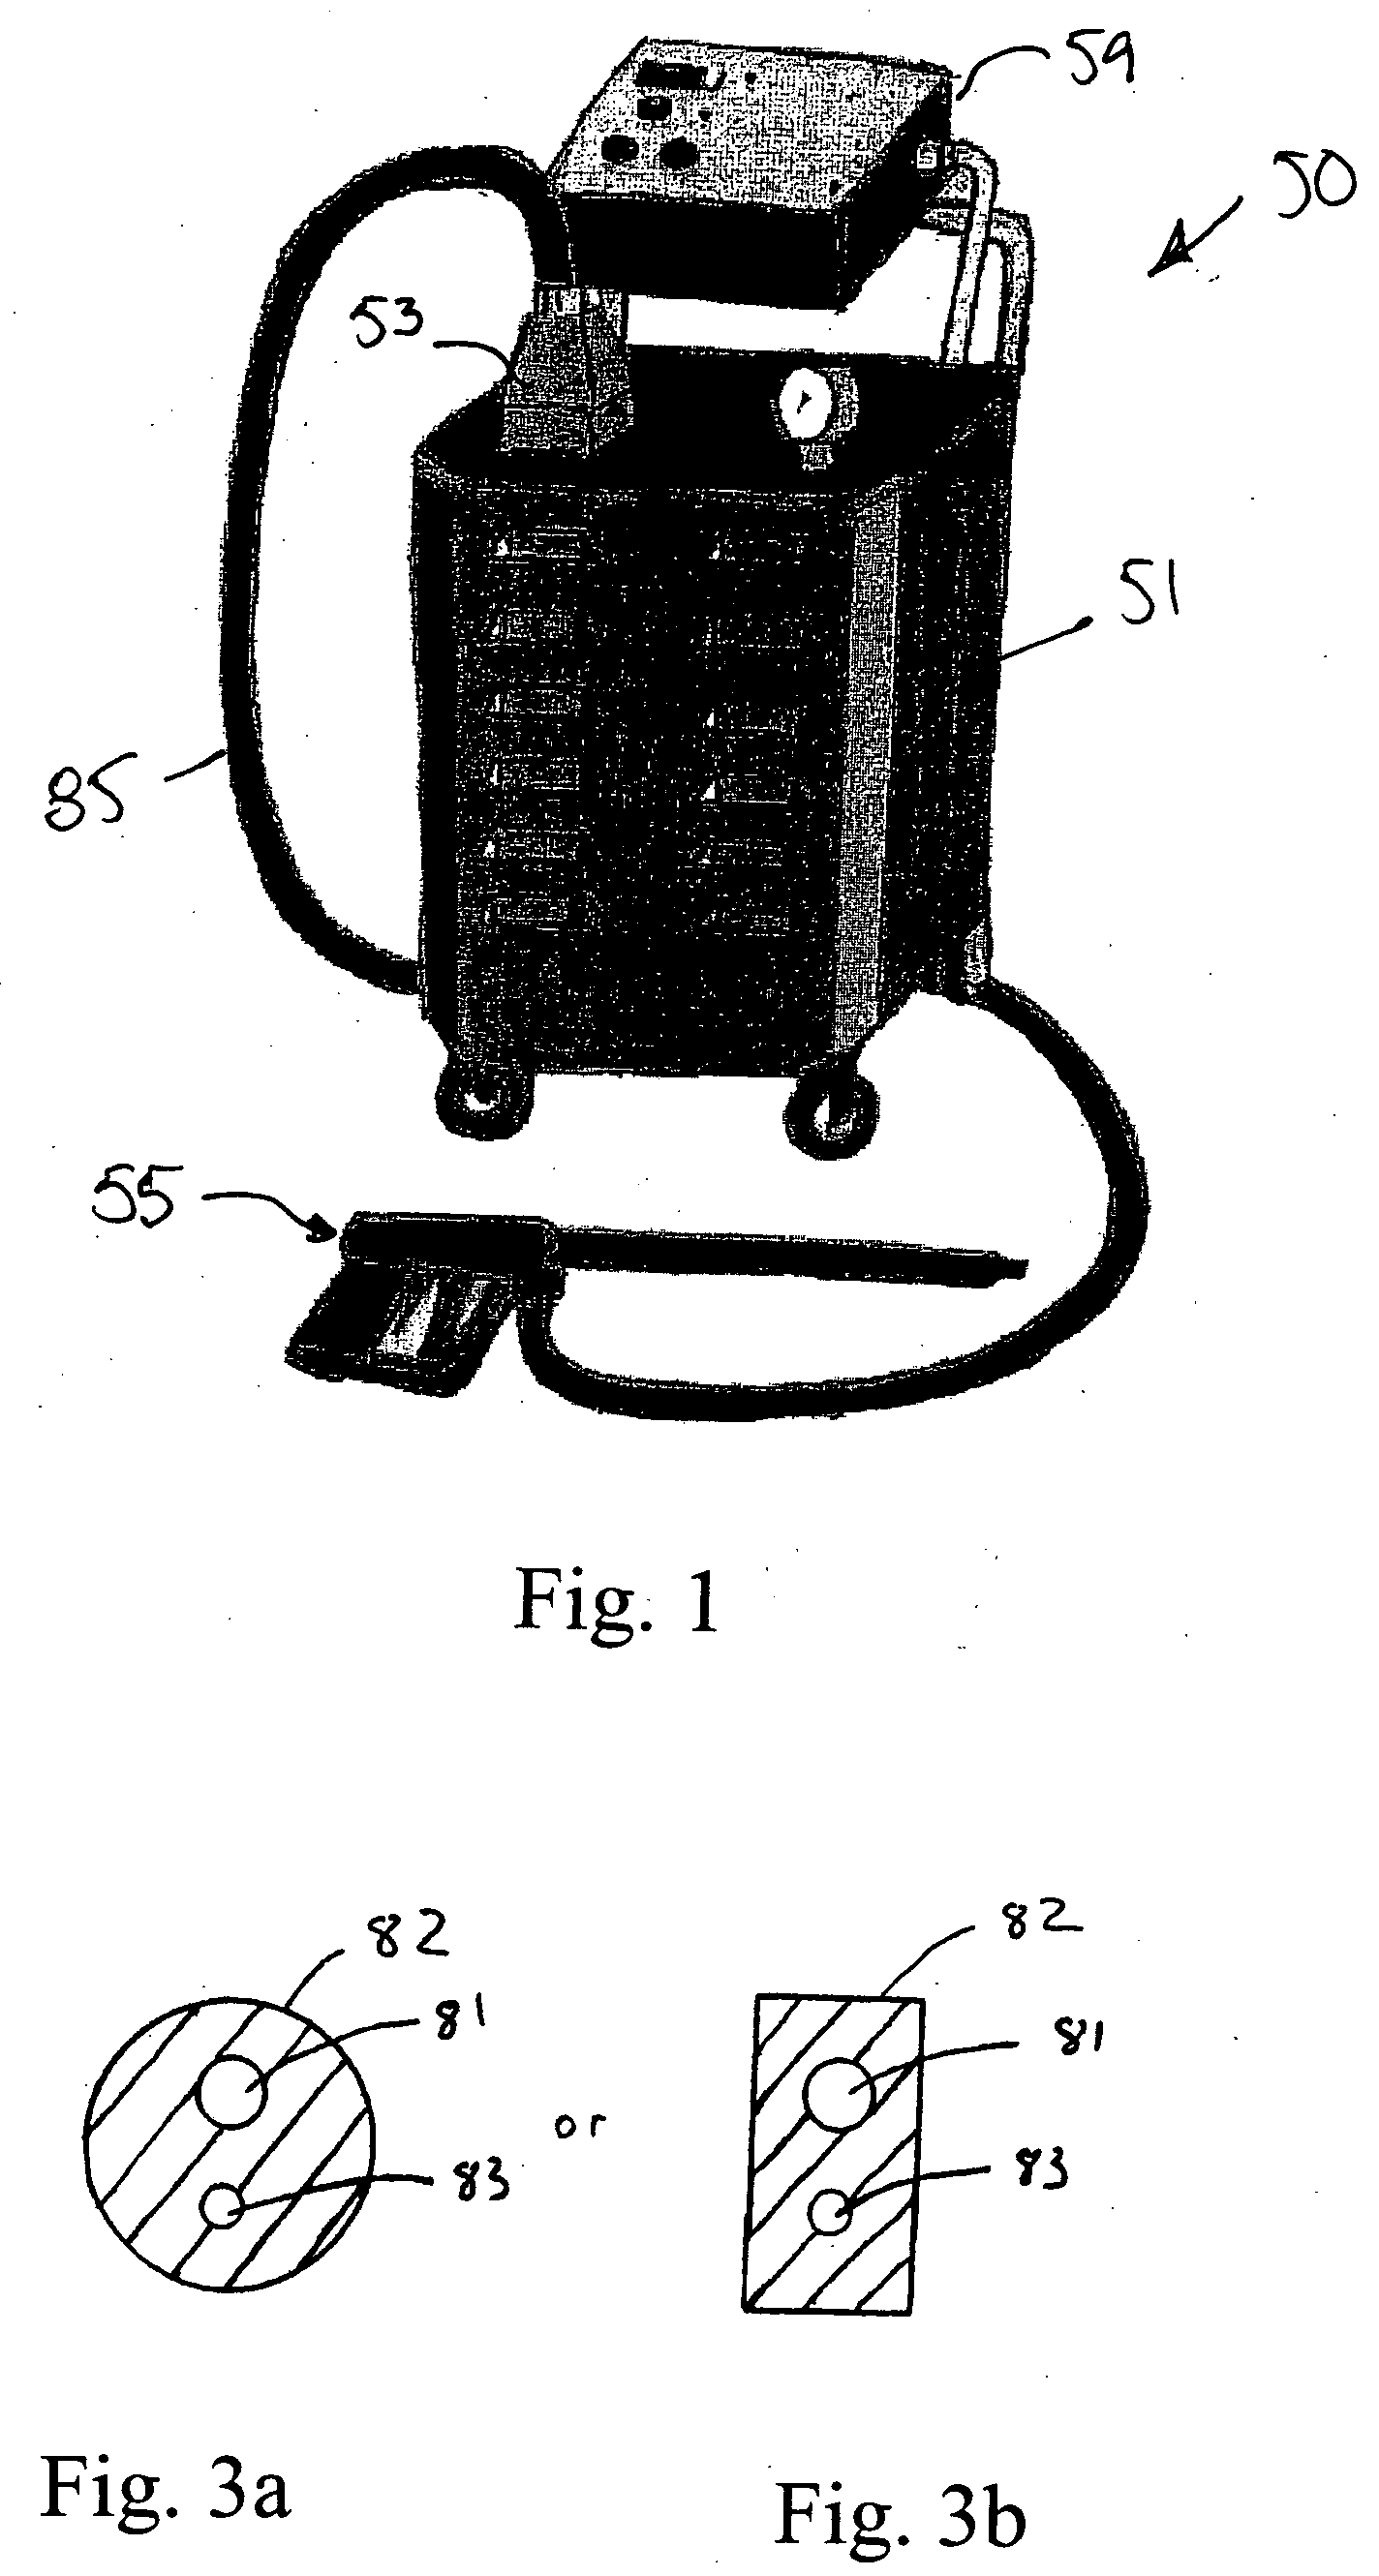 Low pressure saturated steam cleaning assembly with chemical delivery system